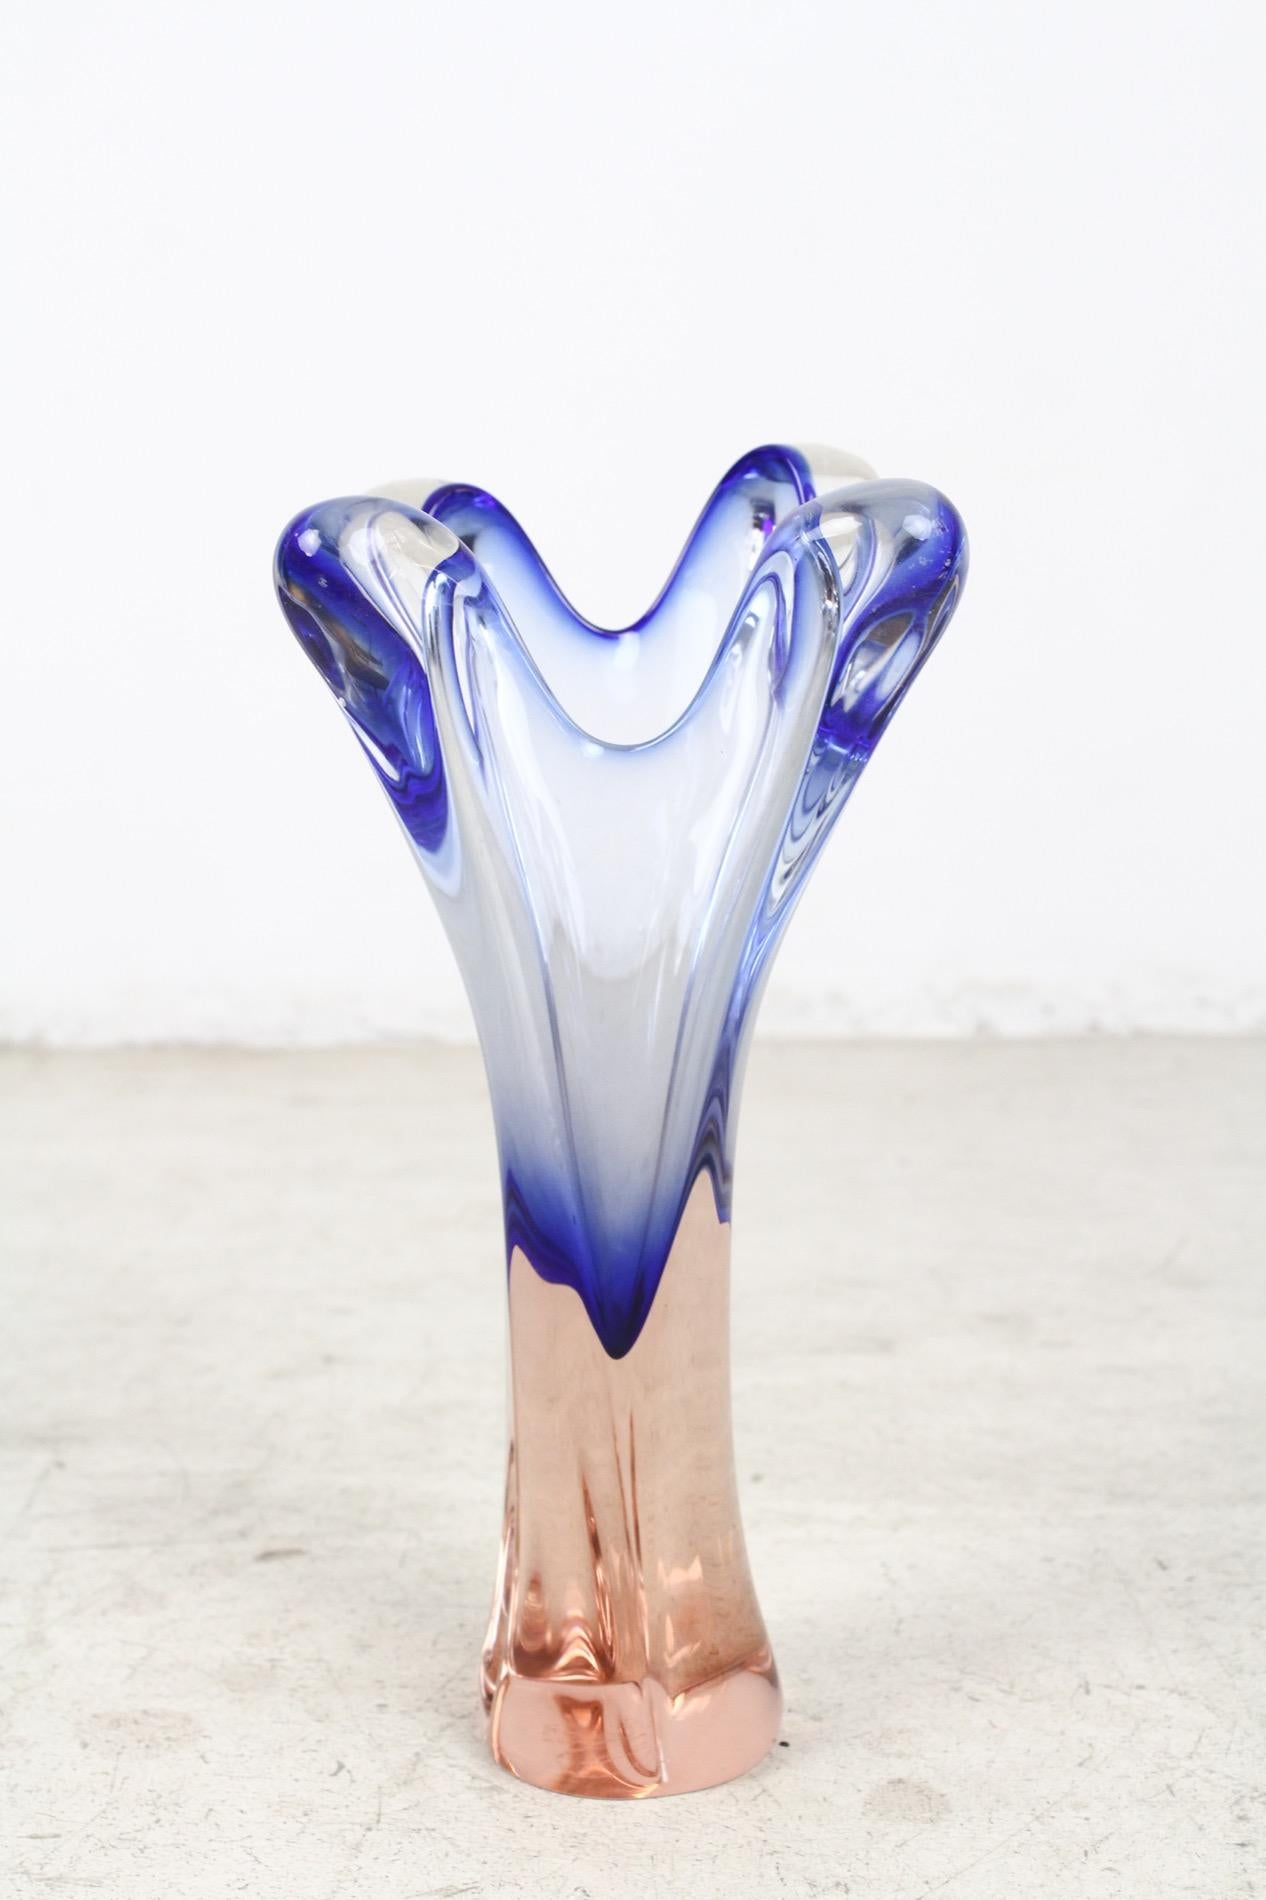 A beautiful vintage 1960s art glass vase, a pure product of Bohemian glass making tradition. A handmade design by Josef Hospodka and made at the Chribska glass works in Czechoslovakia.

Excellent design combining modern and bright colors into a